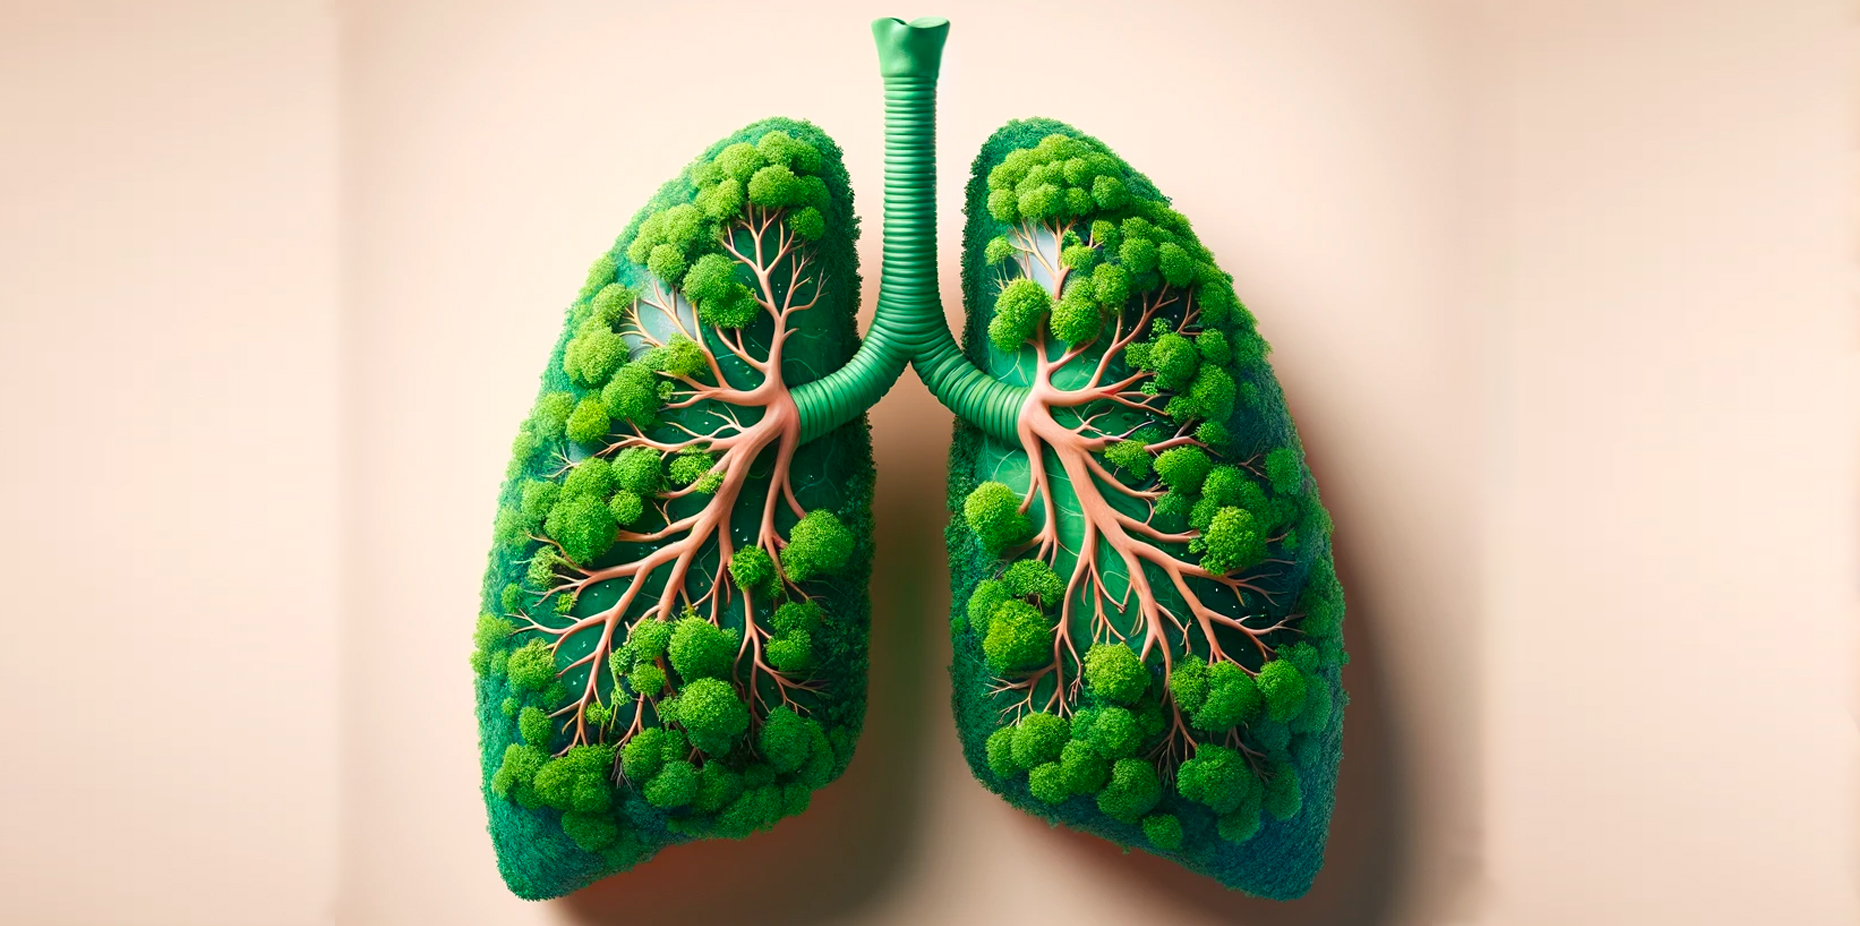 How to Detox & Cleanse Your Lungs? – 9 Natural Ways